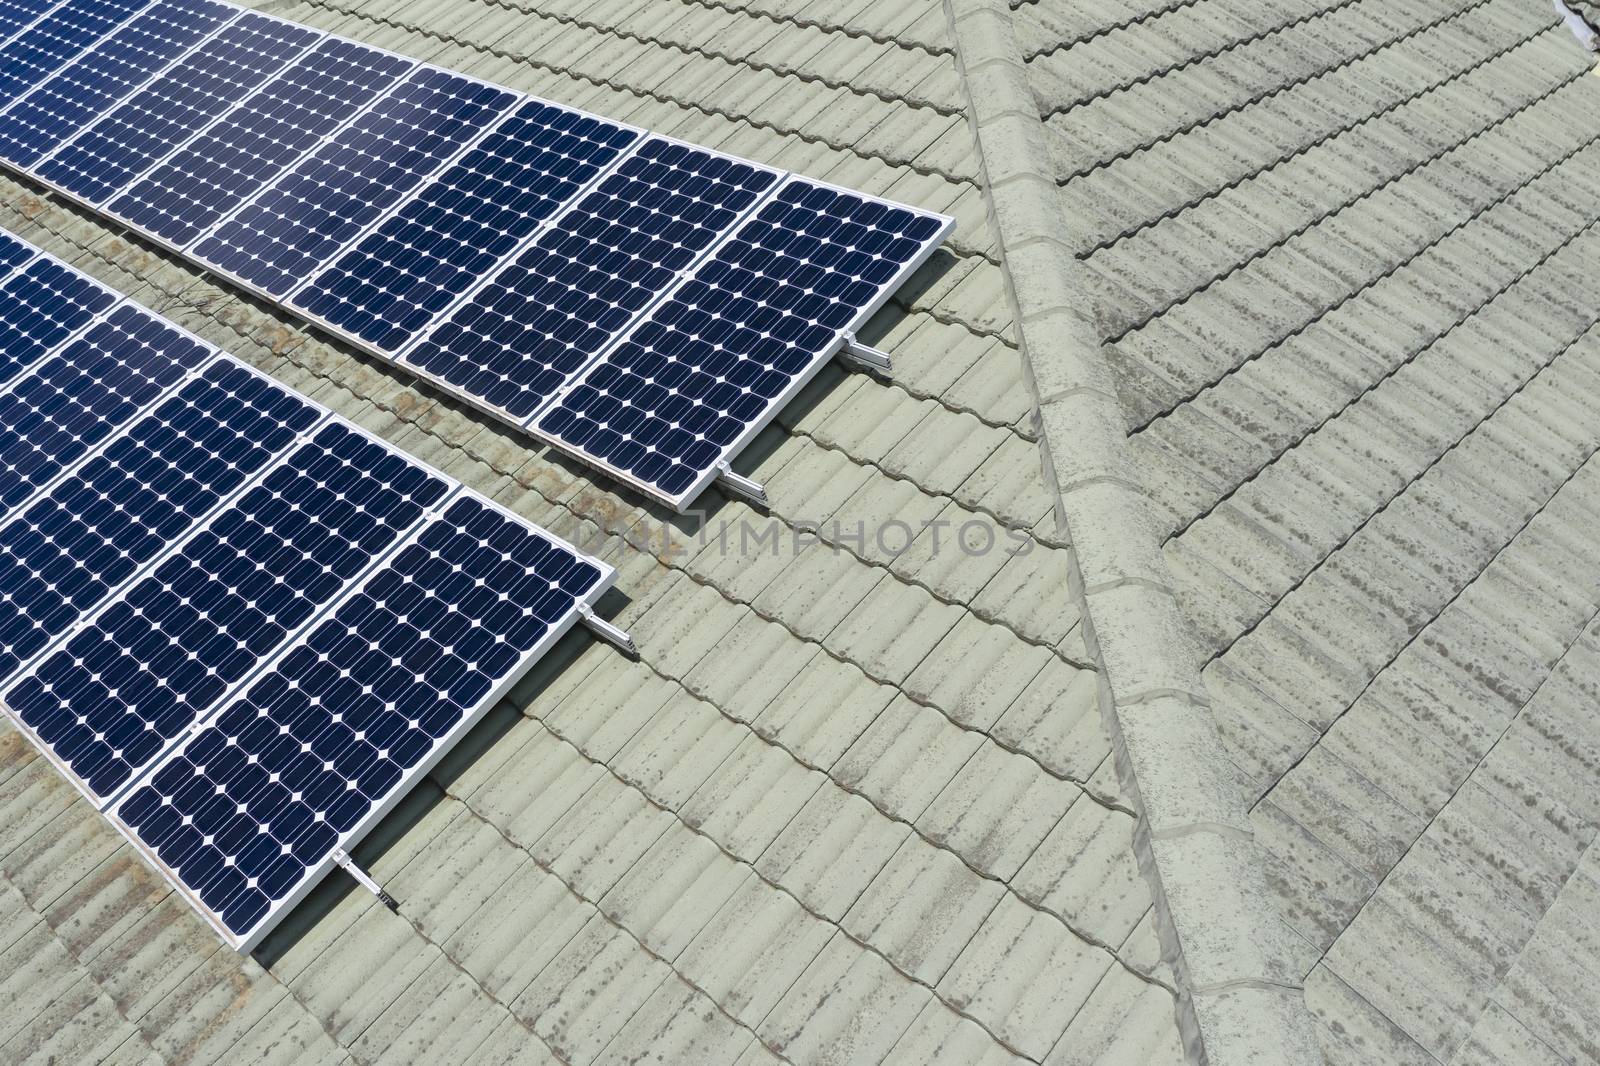 Blue solar panels on a green tiled roof in the bright sunshine by WittkePhotos